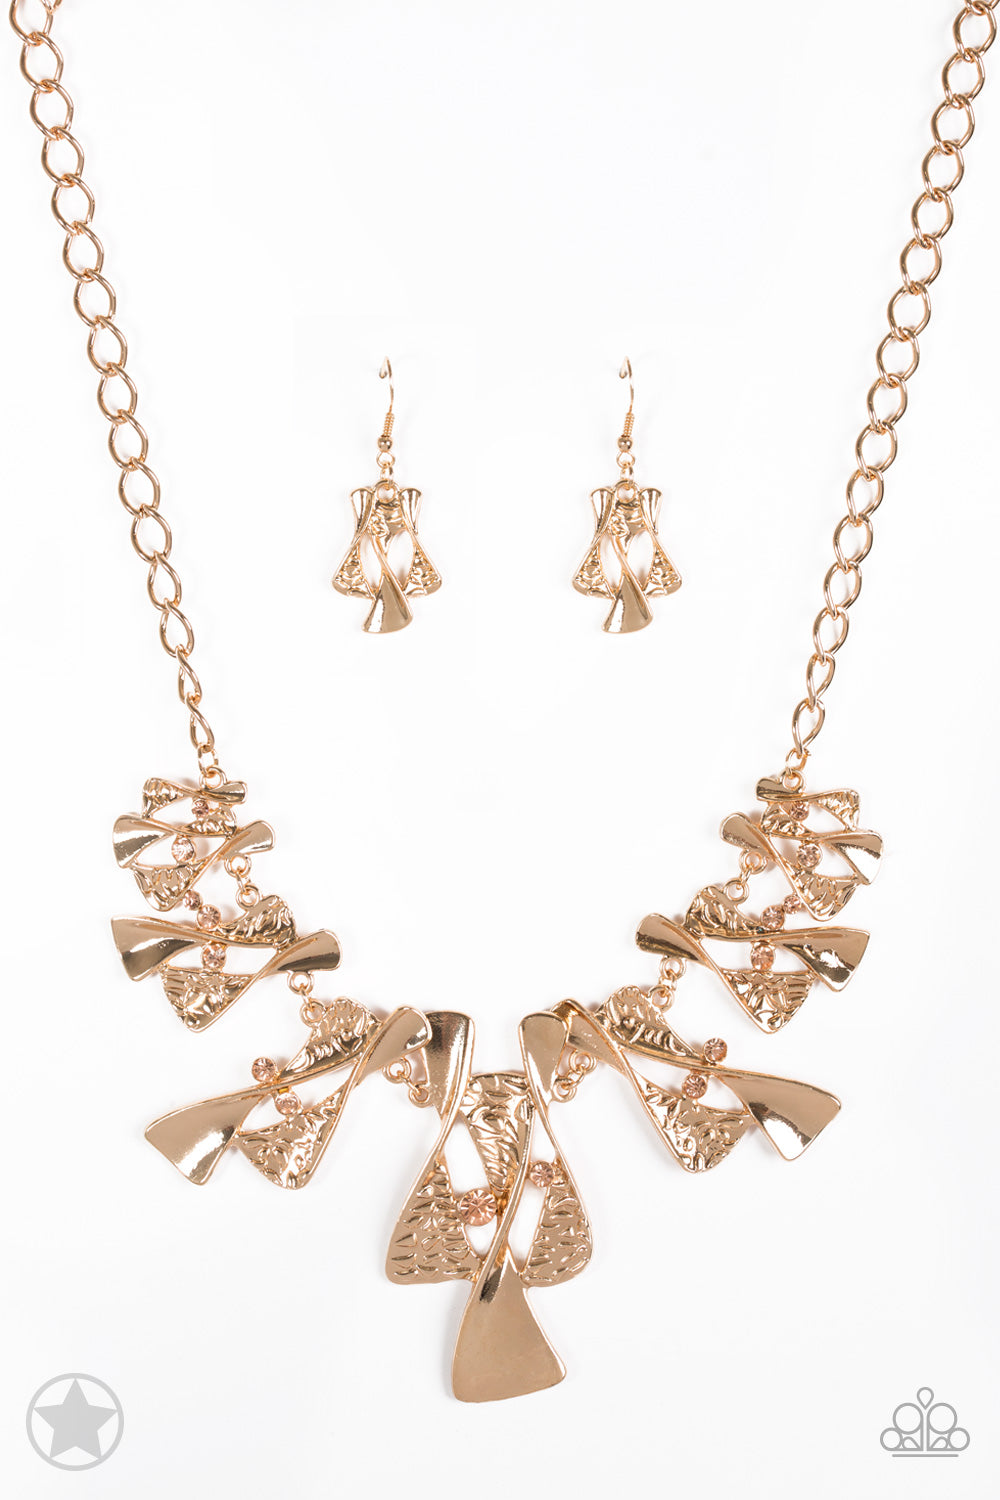 The Sands of Time Gold Paparazzi Necklaces Cashmere Pink Jewels - Cashmere Pink Jewels & Accessories, Cashmere Pink Jewels & Accessories - Paparazzi